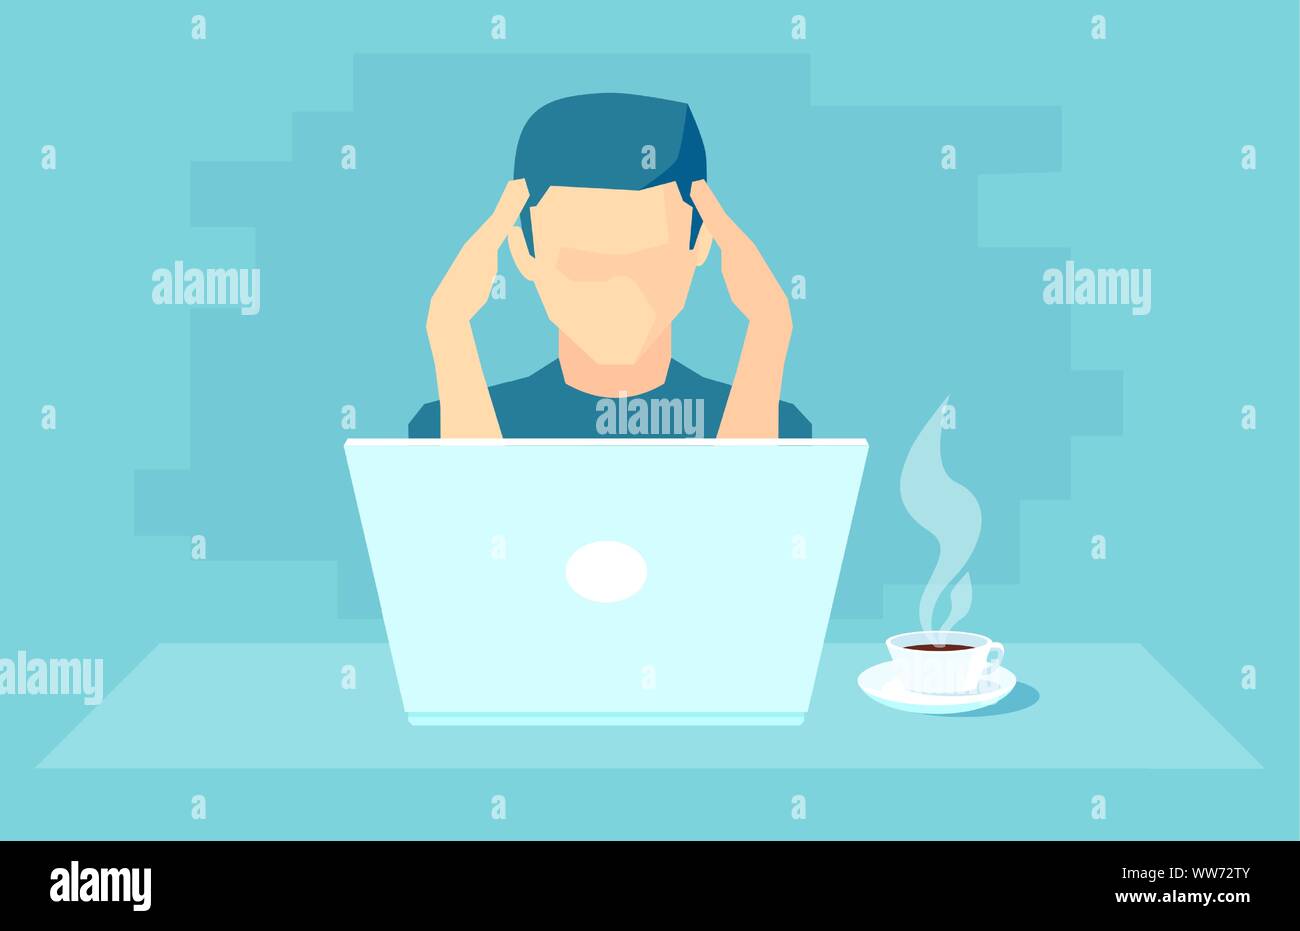 Vector of an overworked man with headache working on laptop feeling under stress Stock Vector